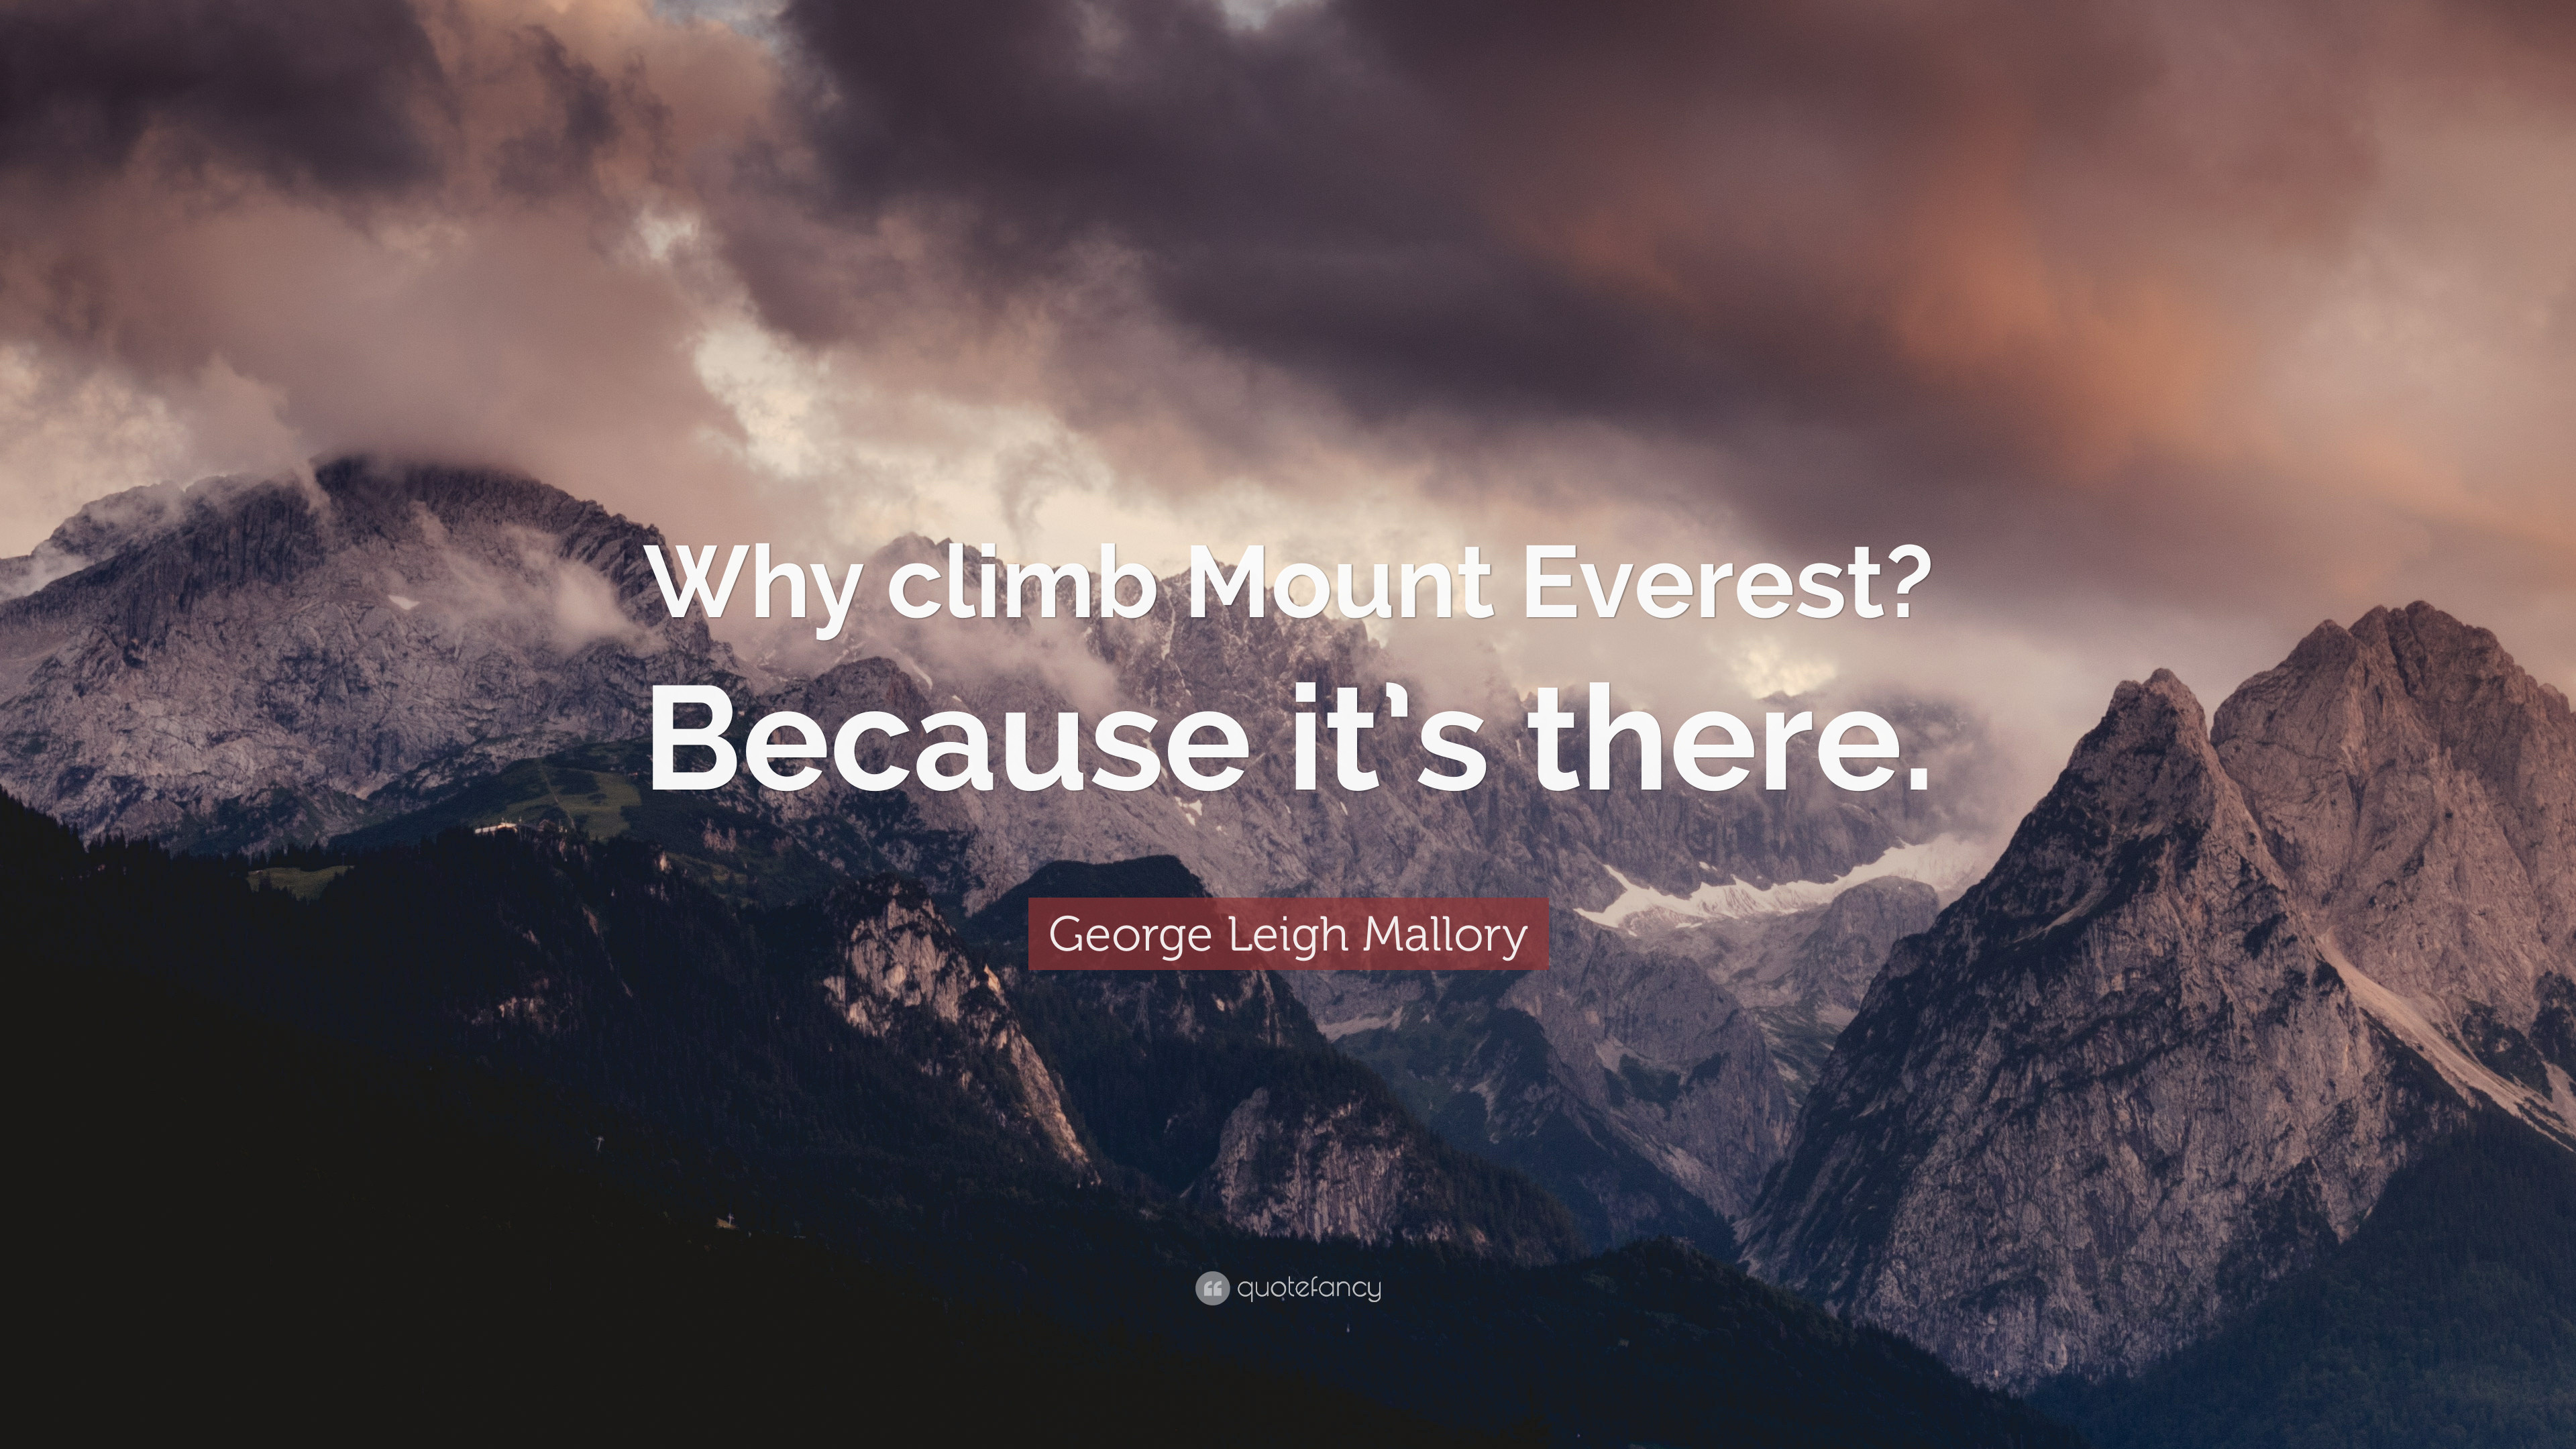 3840x2160 George Leigh Mallory Quote: “Why climb Mount Everest? Because it's there.”